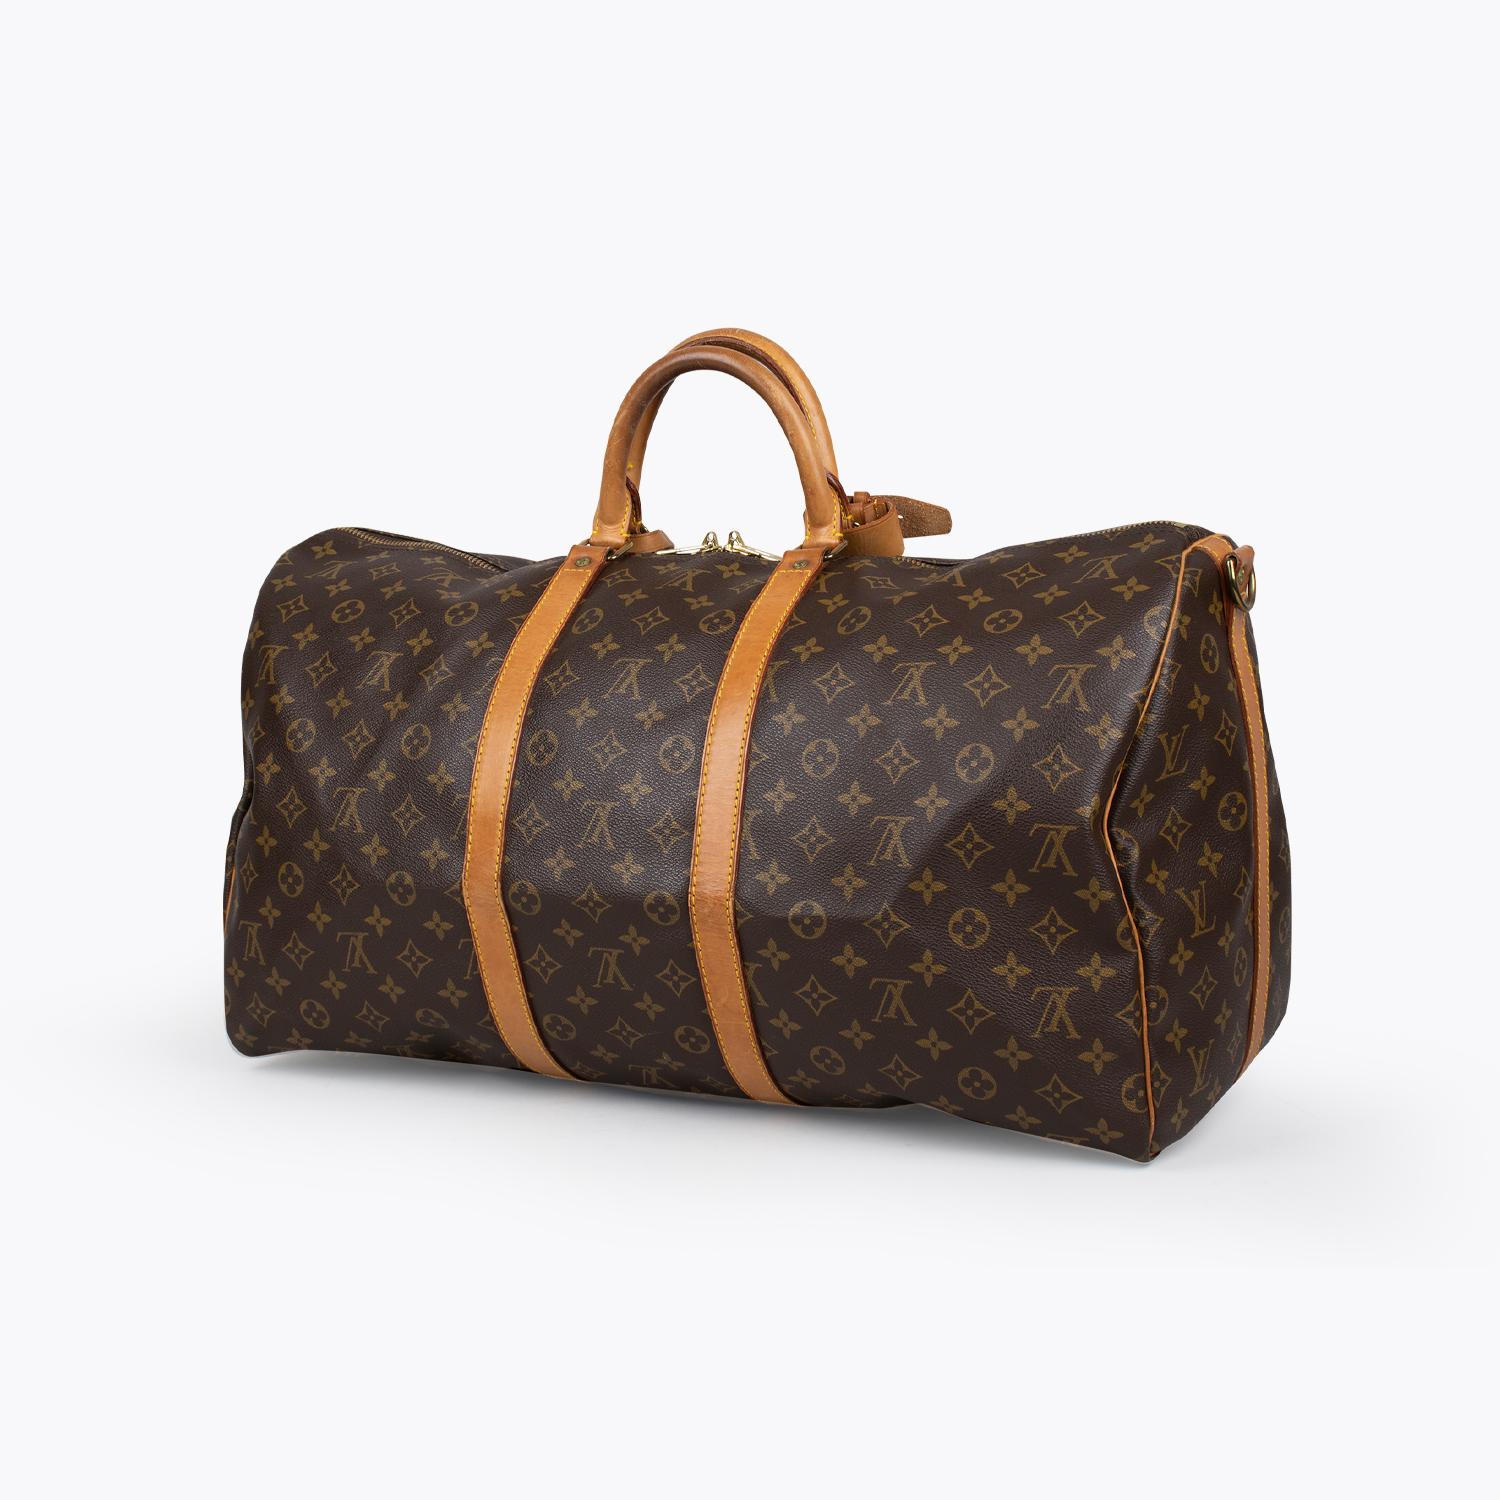 Louis Vuitton Keepall Bandoulière 55 Bag In Good Condition For Sale In Sundbyberg, SE